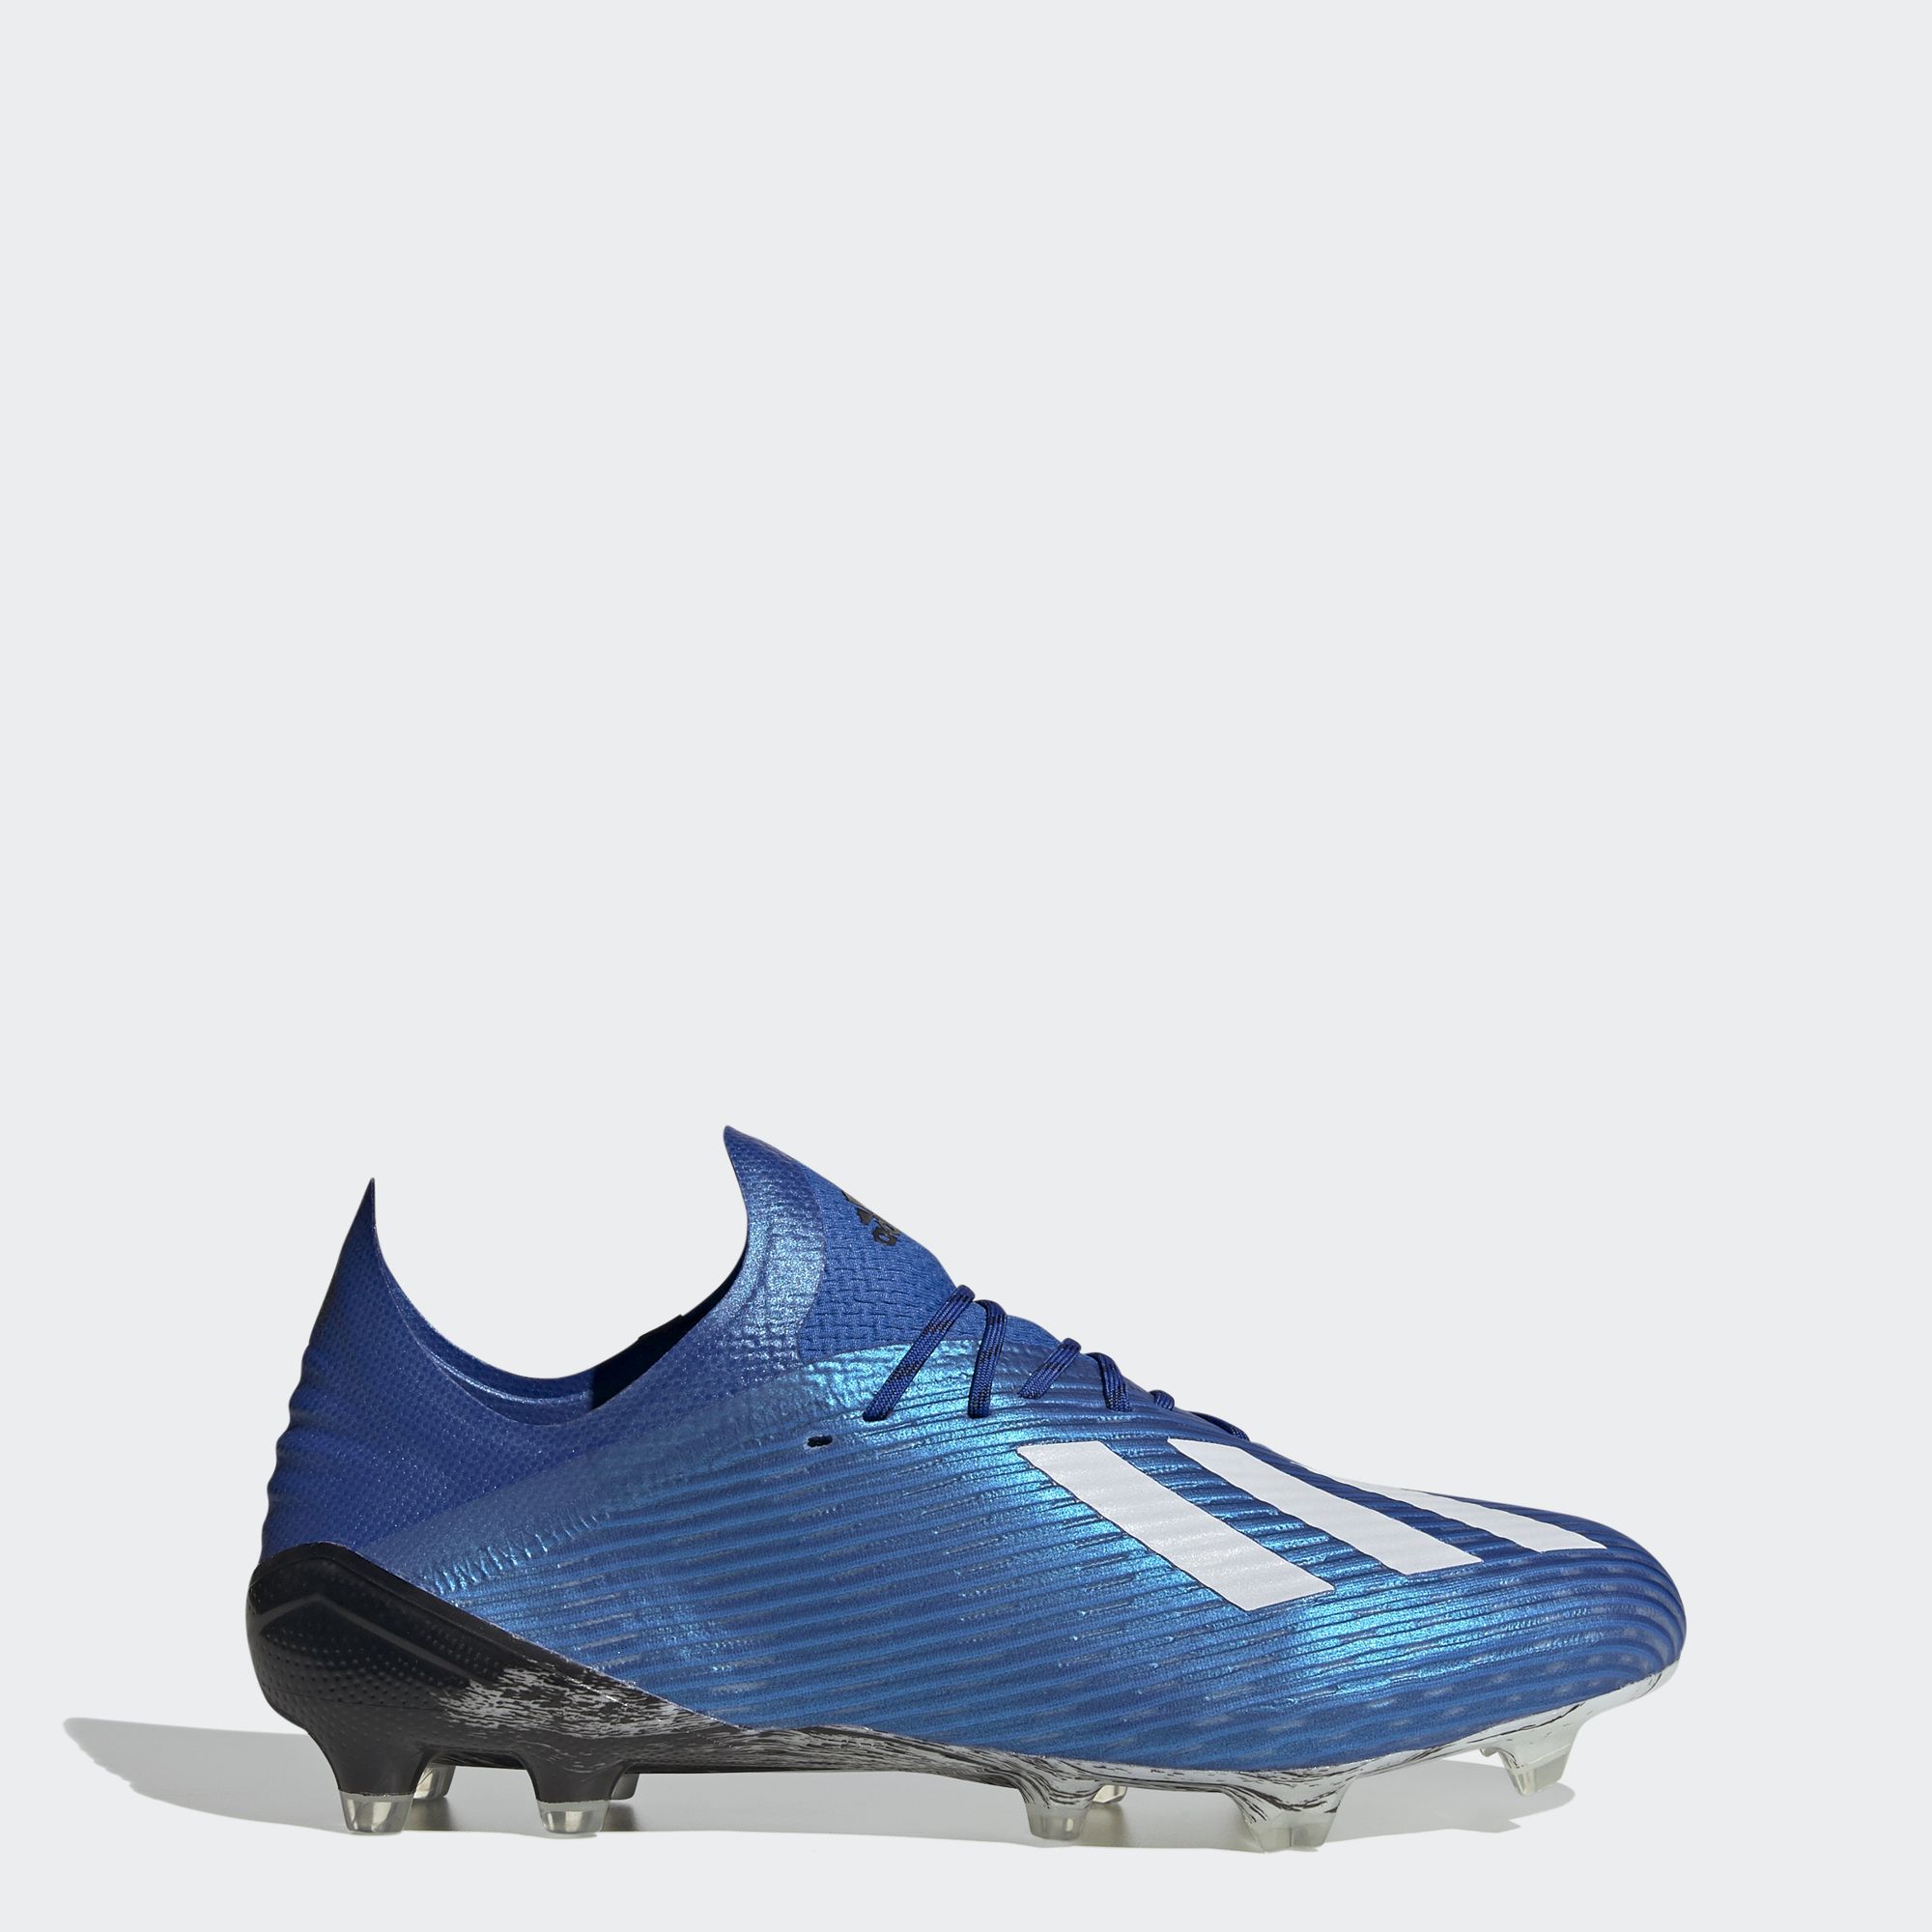 Buy Football Shoes Online | lazada.sg